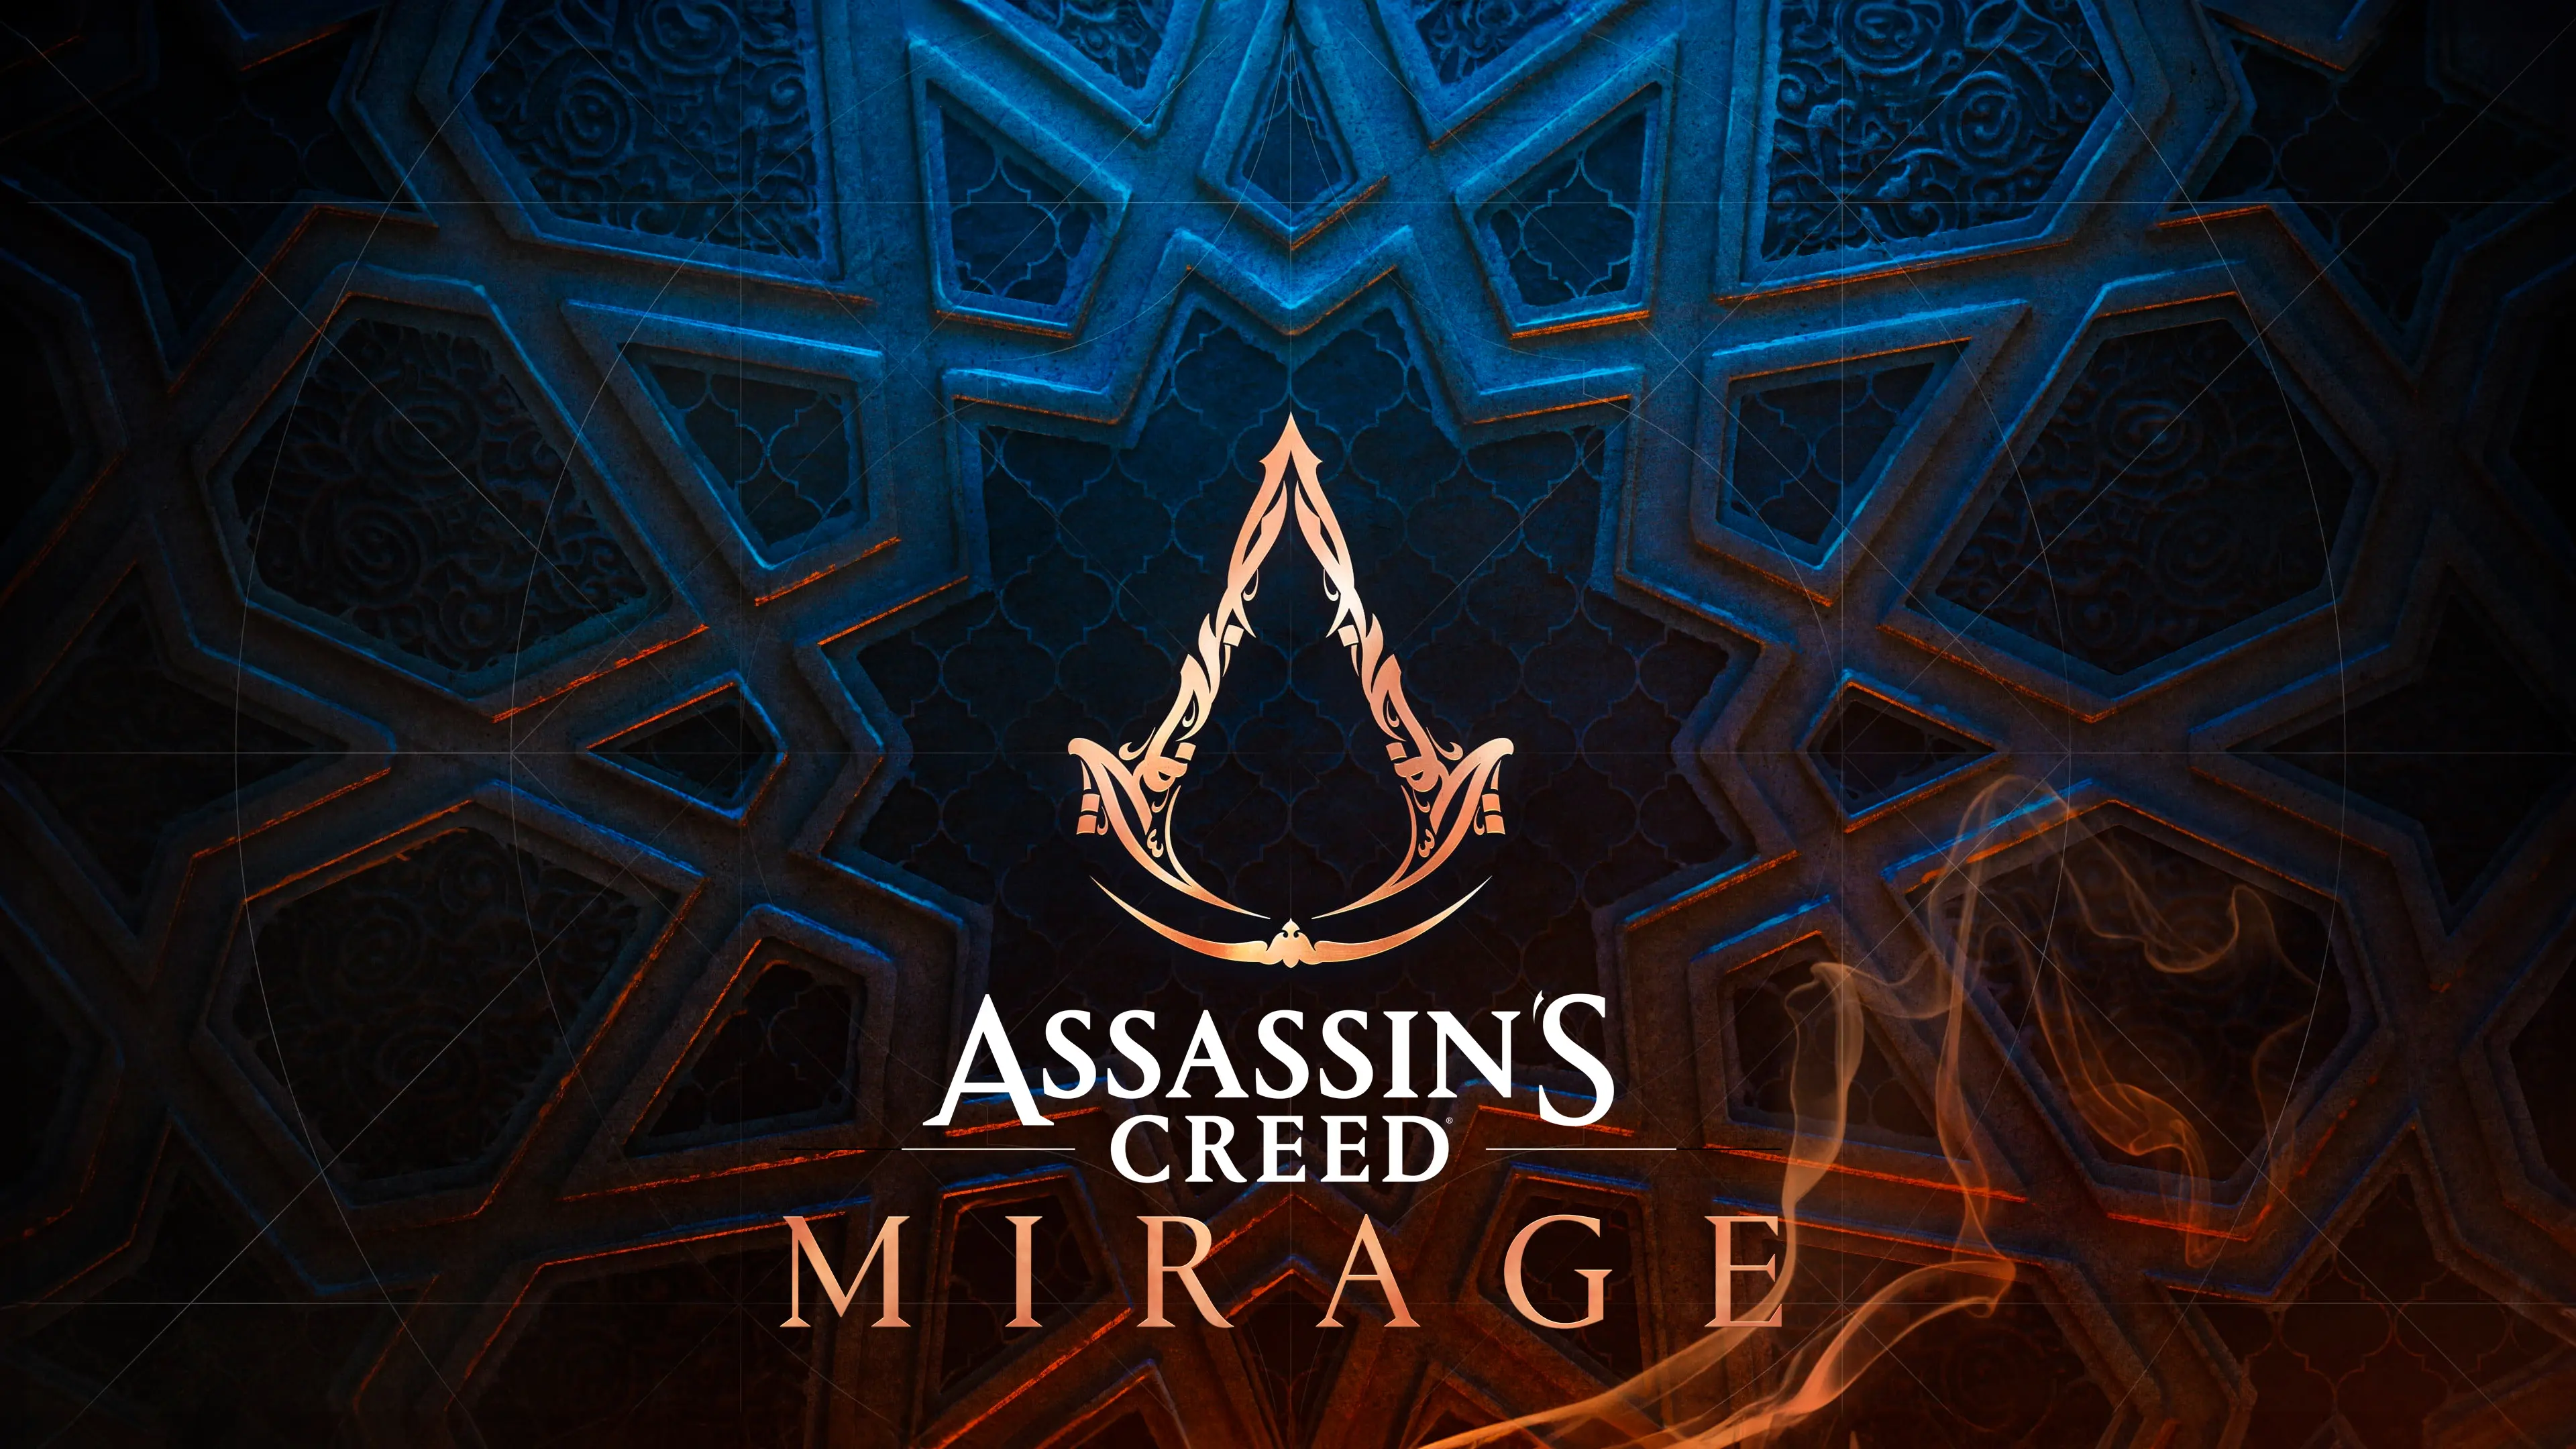 Game Assassins Creed Mirage wallpaper 2 | Background Image